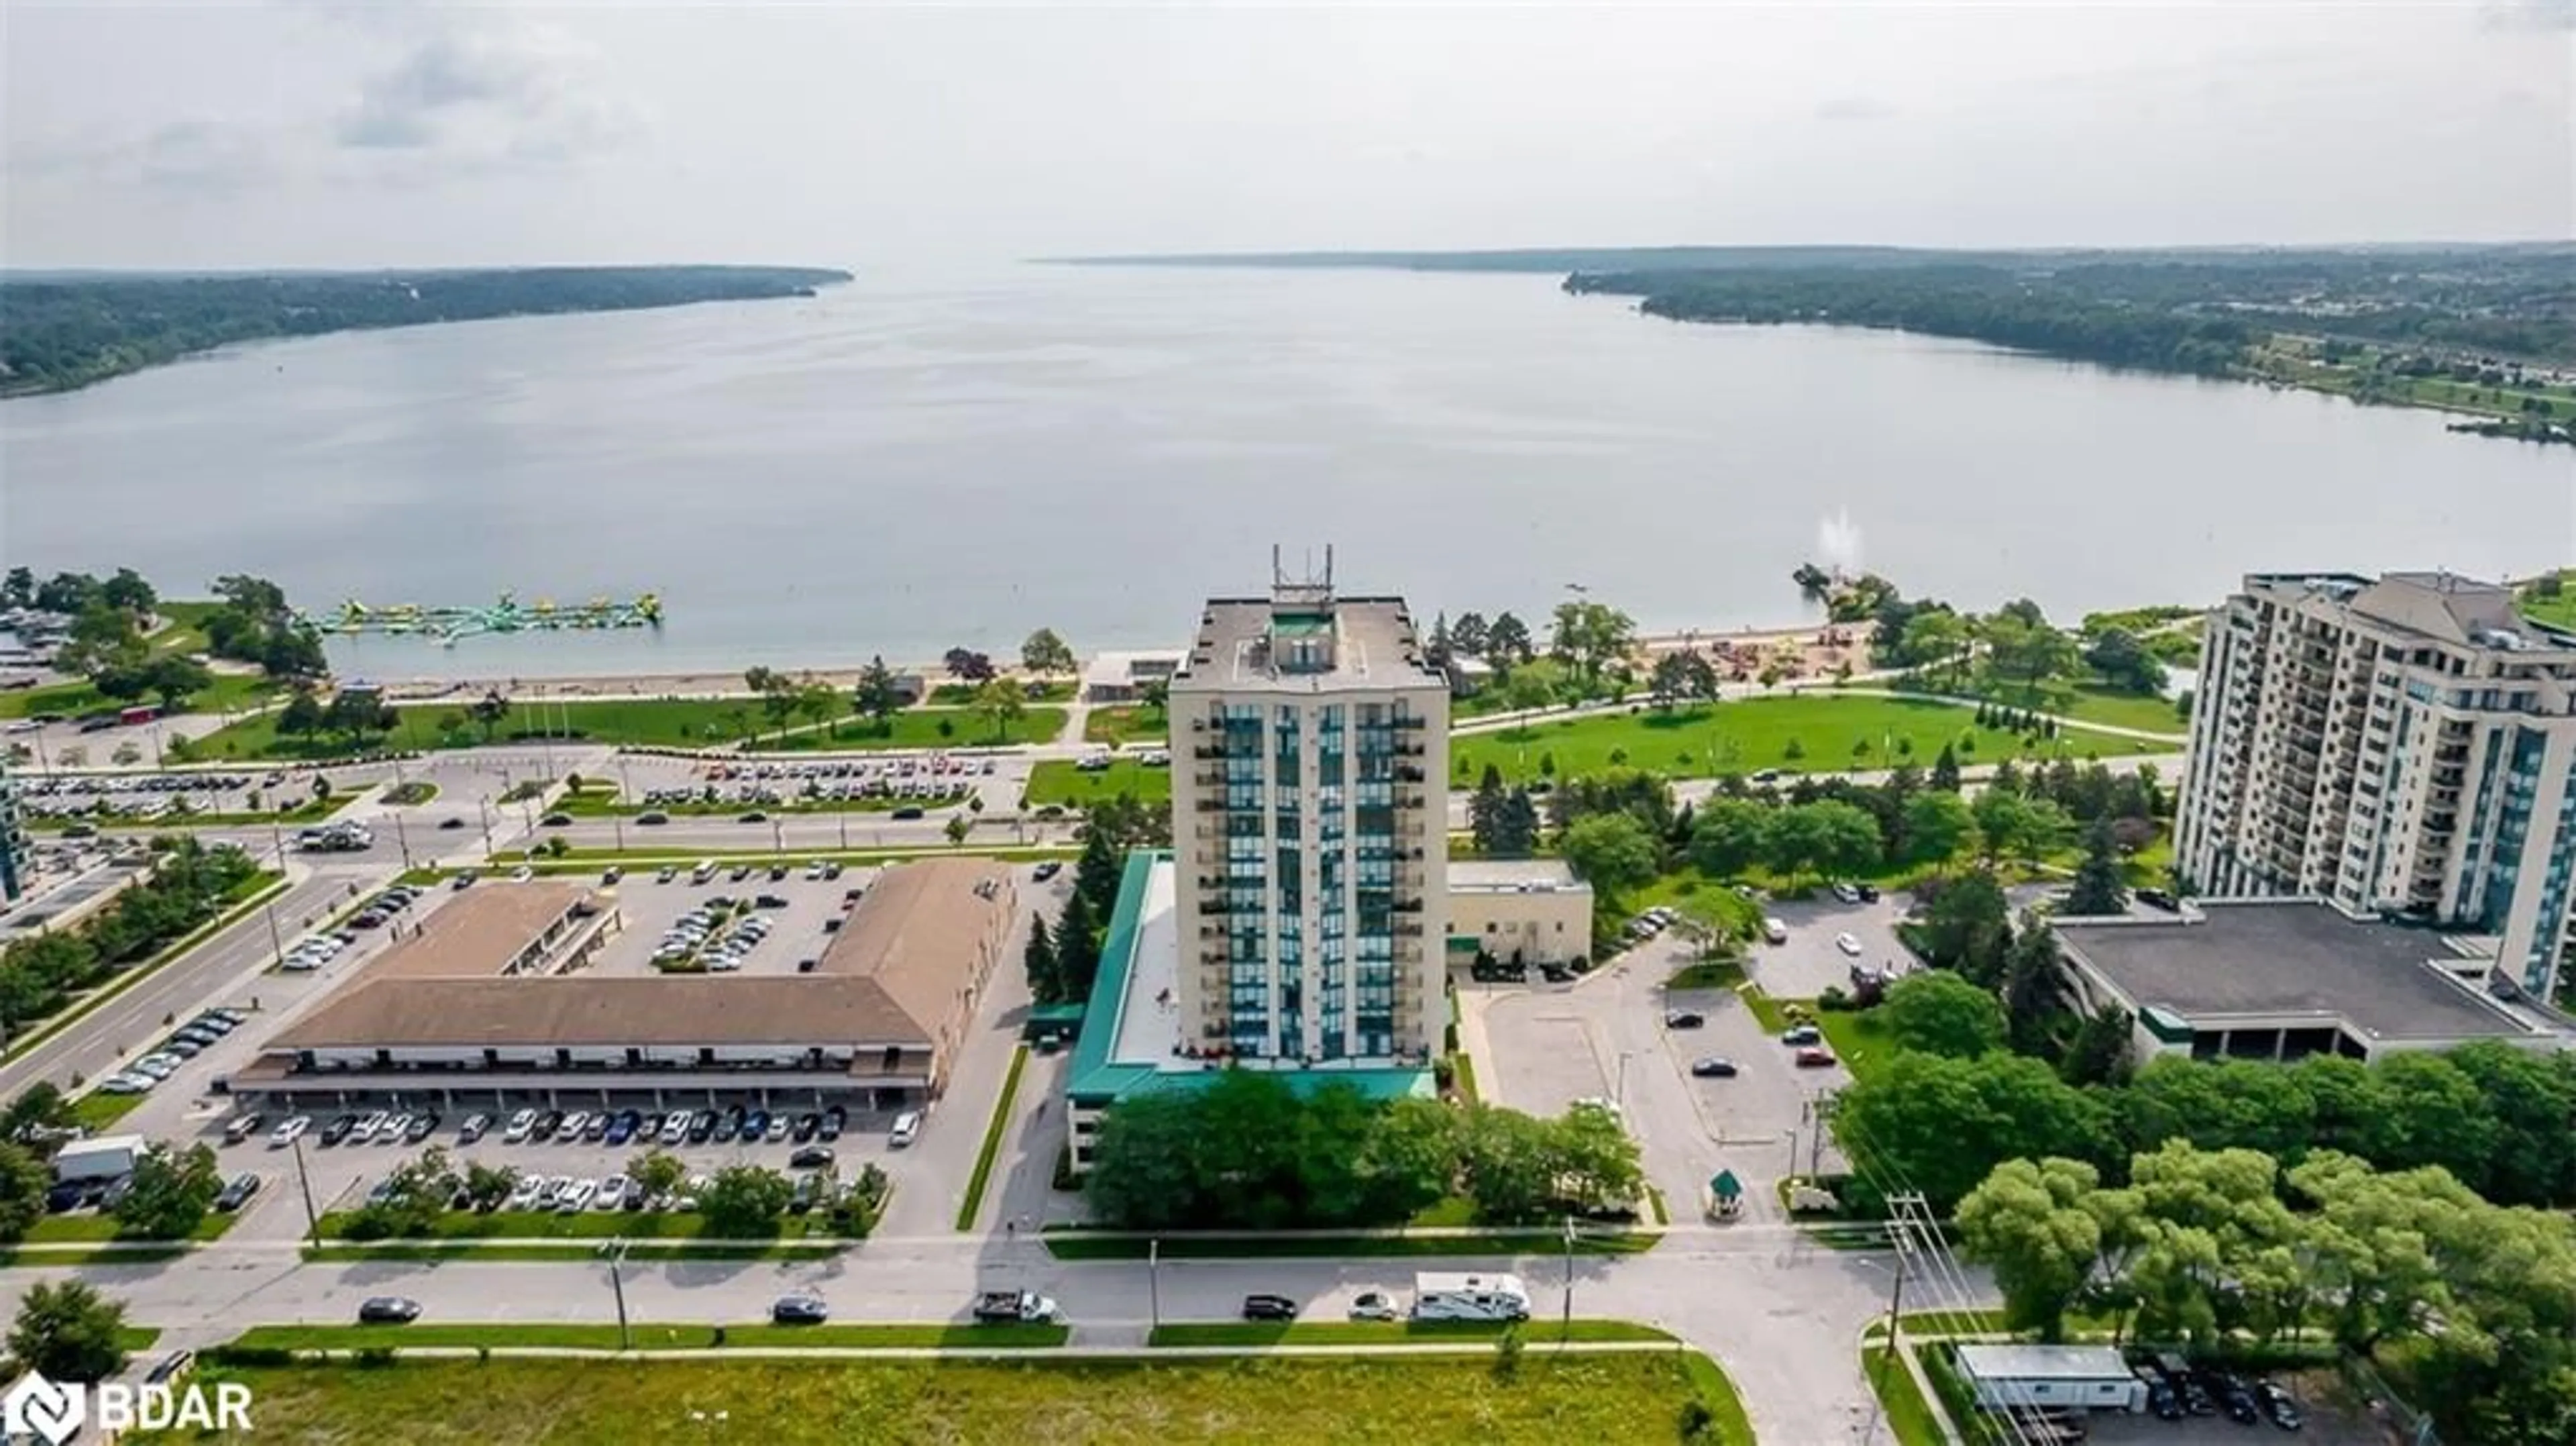 Lakeview for 65 Ellen St #306, Barrie Ontario L4N 3A5